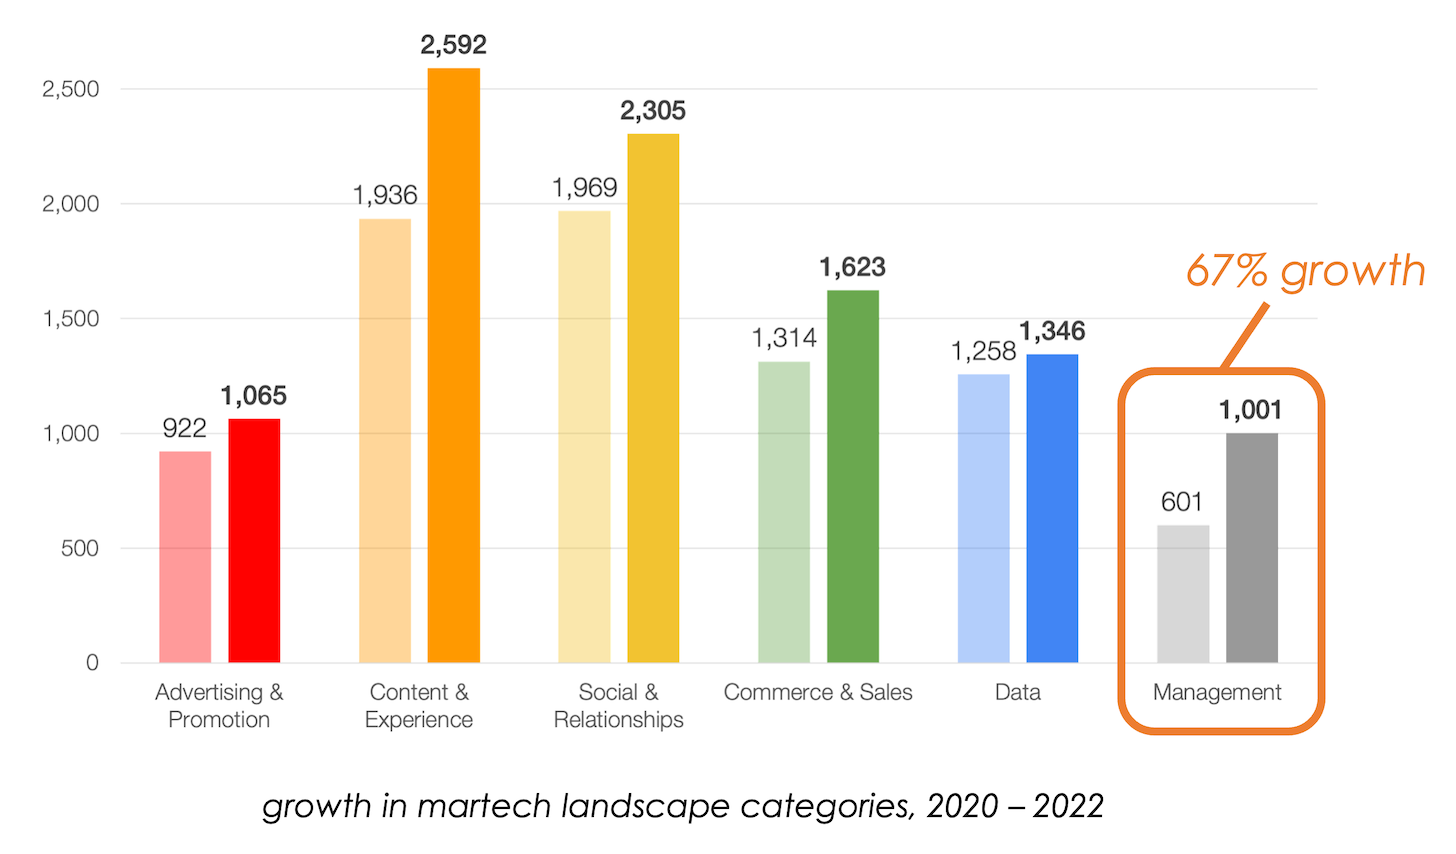 Growth in Management Category of Martech Landscape, 2020-2022